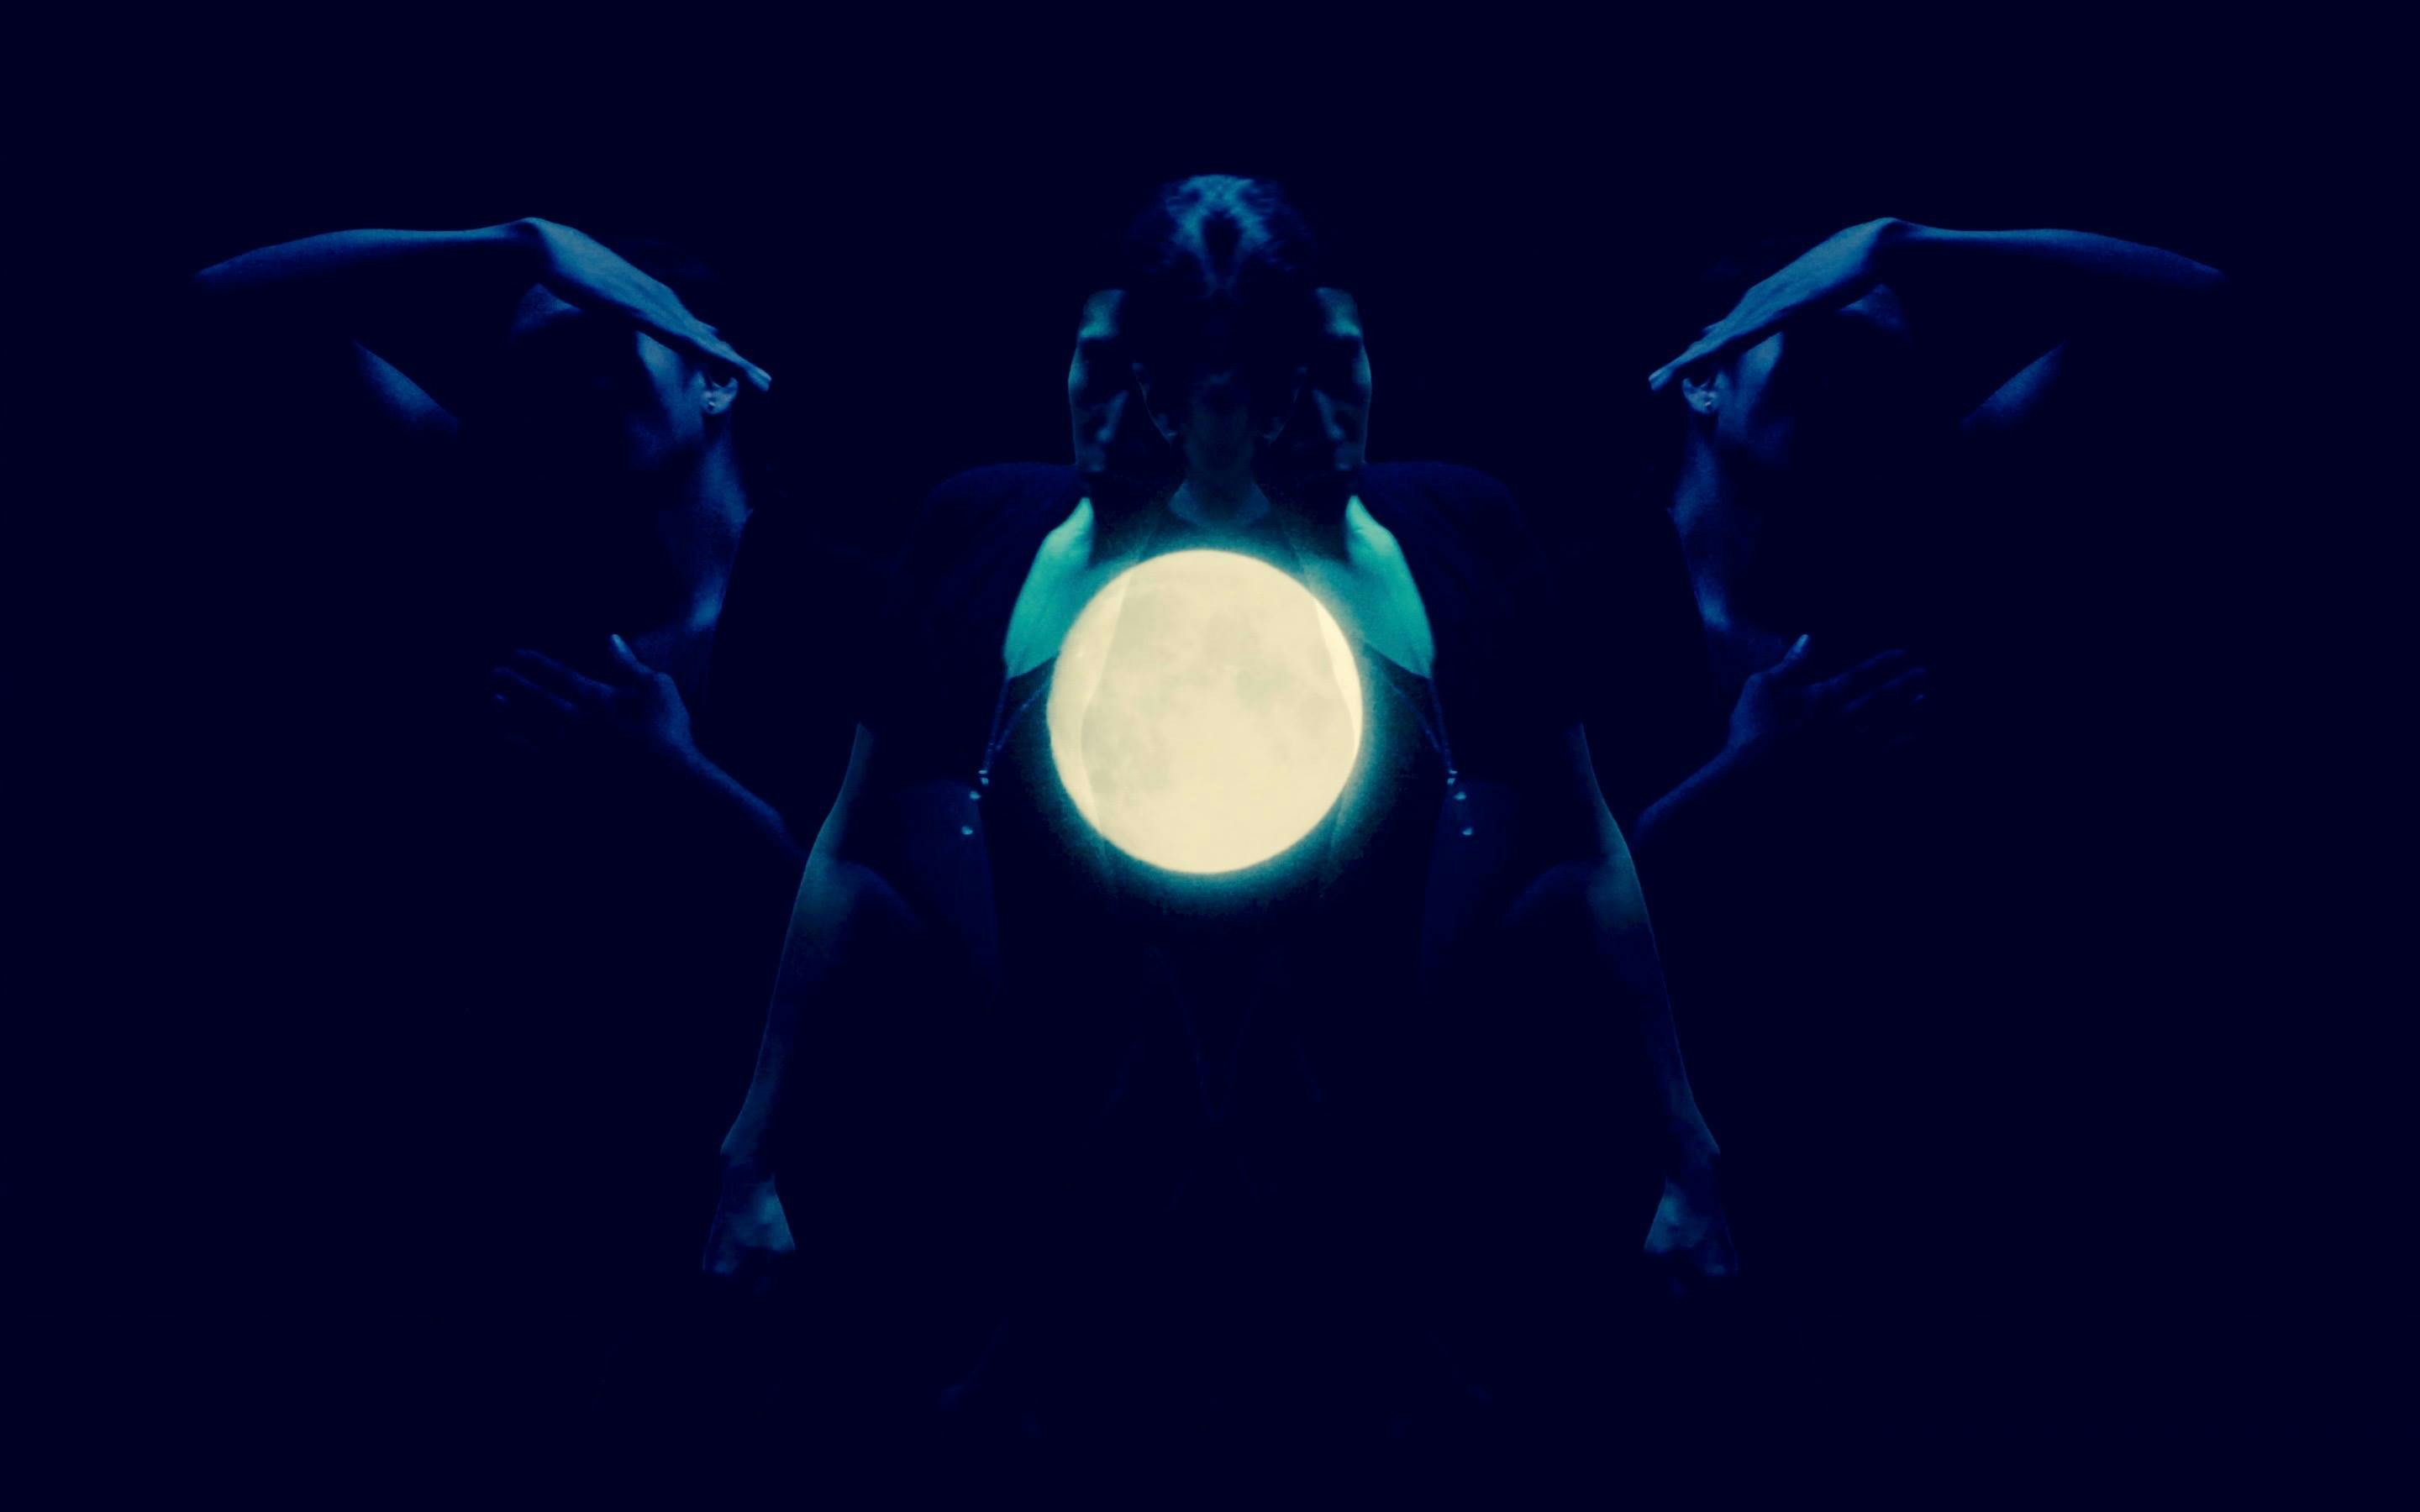 A still image from Beric Manywounds's film titled Tsanizid (Wake Up). Several animal-like shaped black objects are flowing around the full moon at night. 